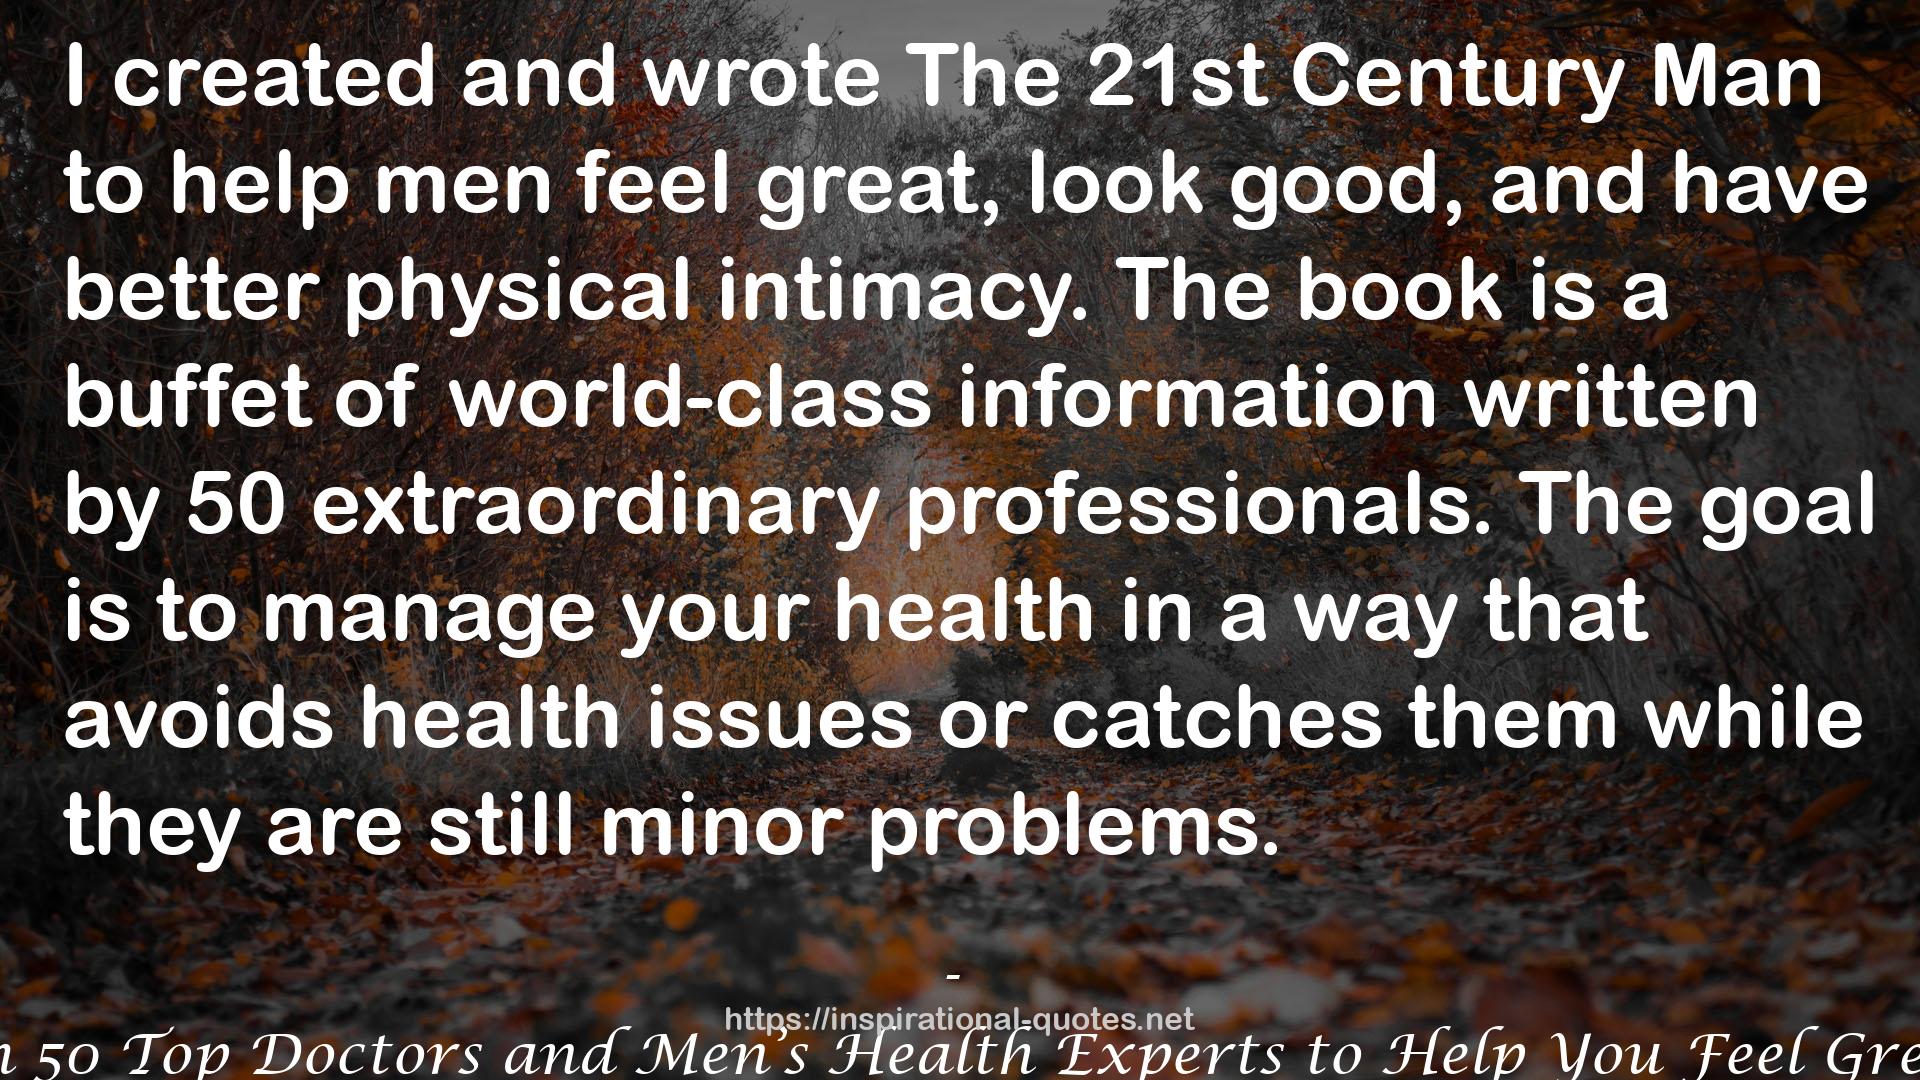 The 21st Century Man: Advice from 50 Top Doctors and Men’s Health Experts to Help You Feel Great, Look Good and Have Better Sex QUOTES